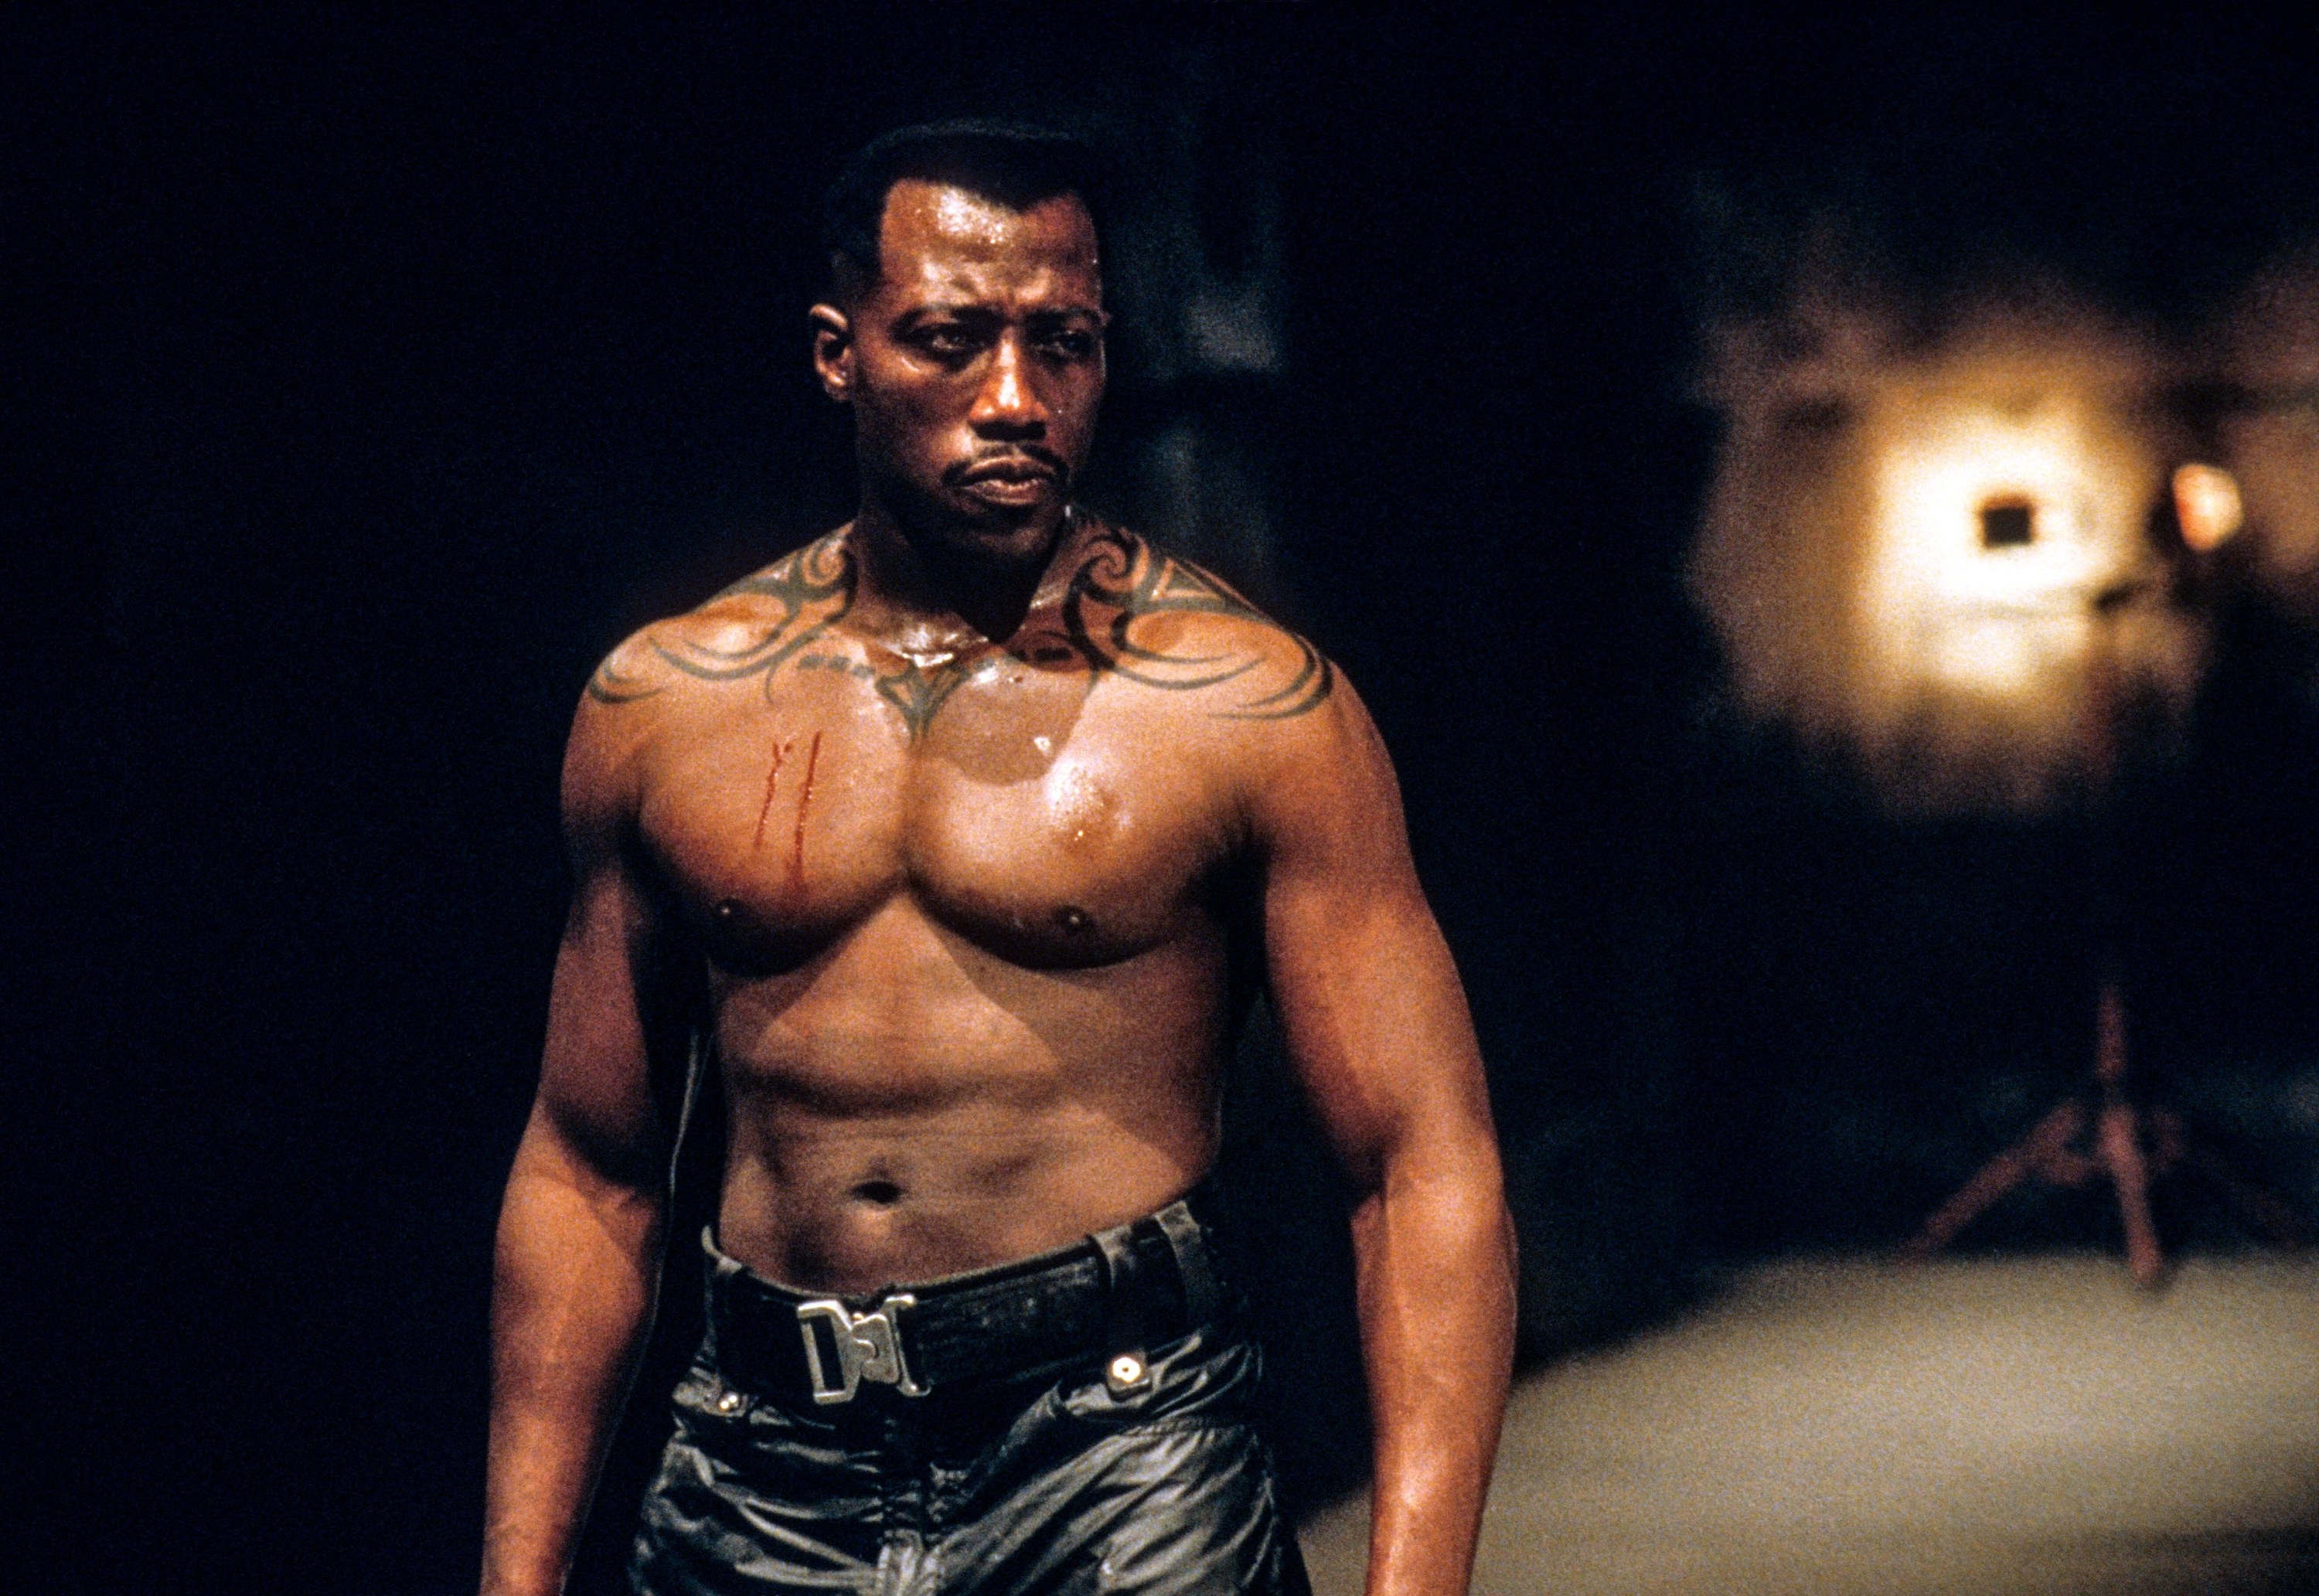 wesley snipes shirtless and tattooed as blade